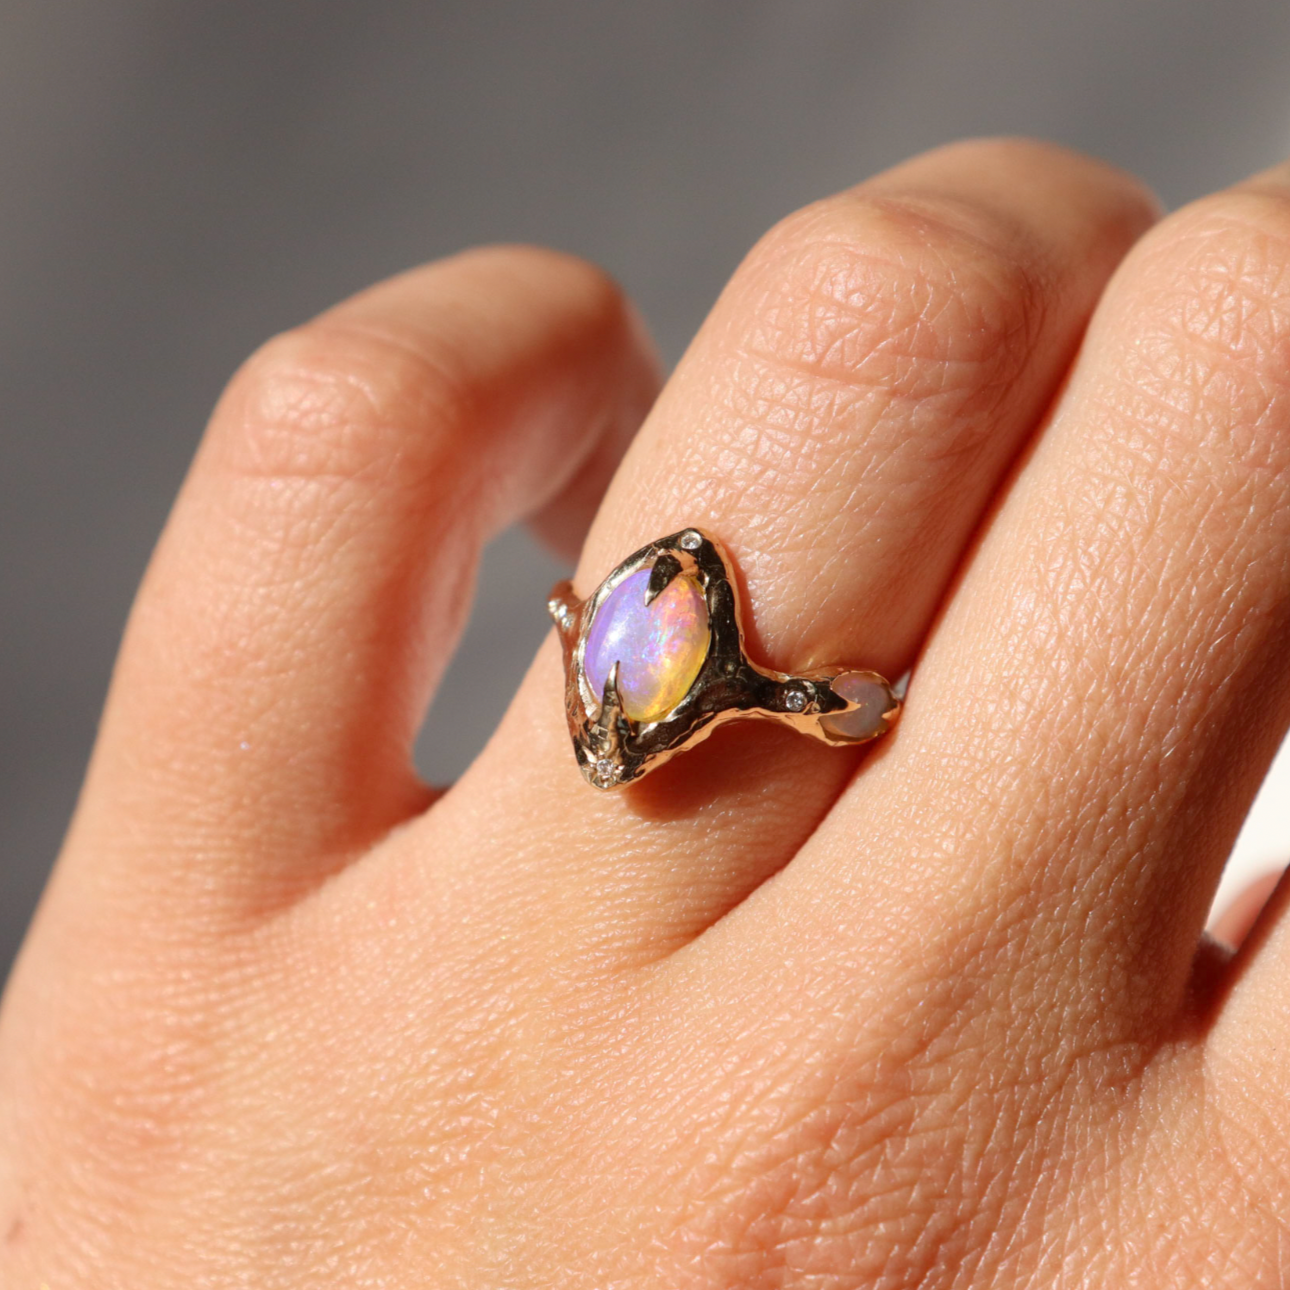 gold pipe opal ring is worn on a ring finger